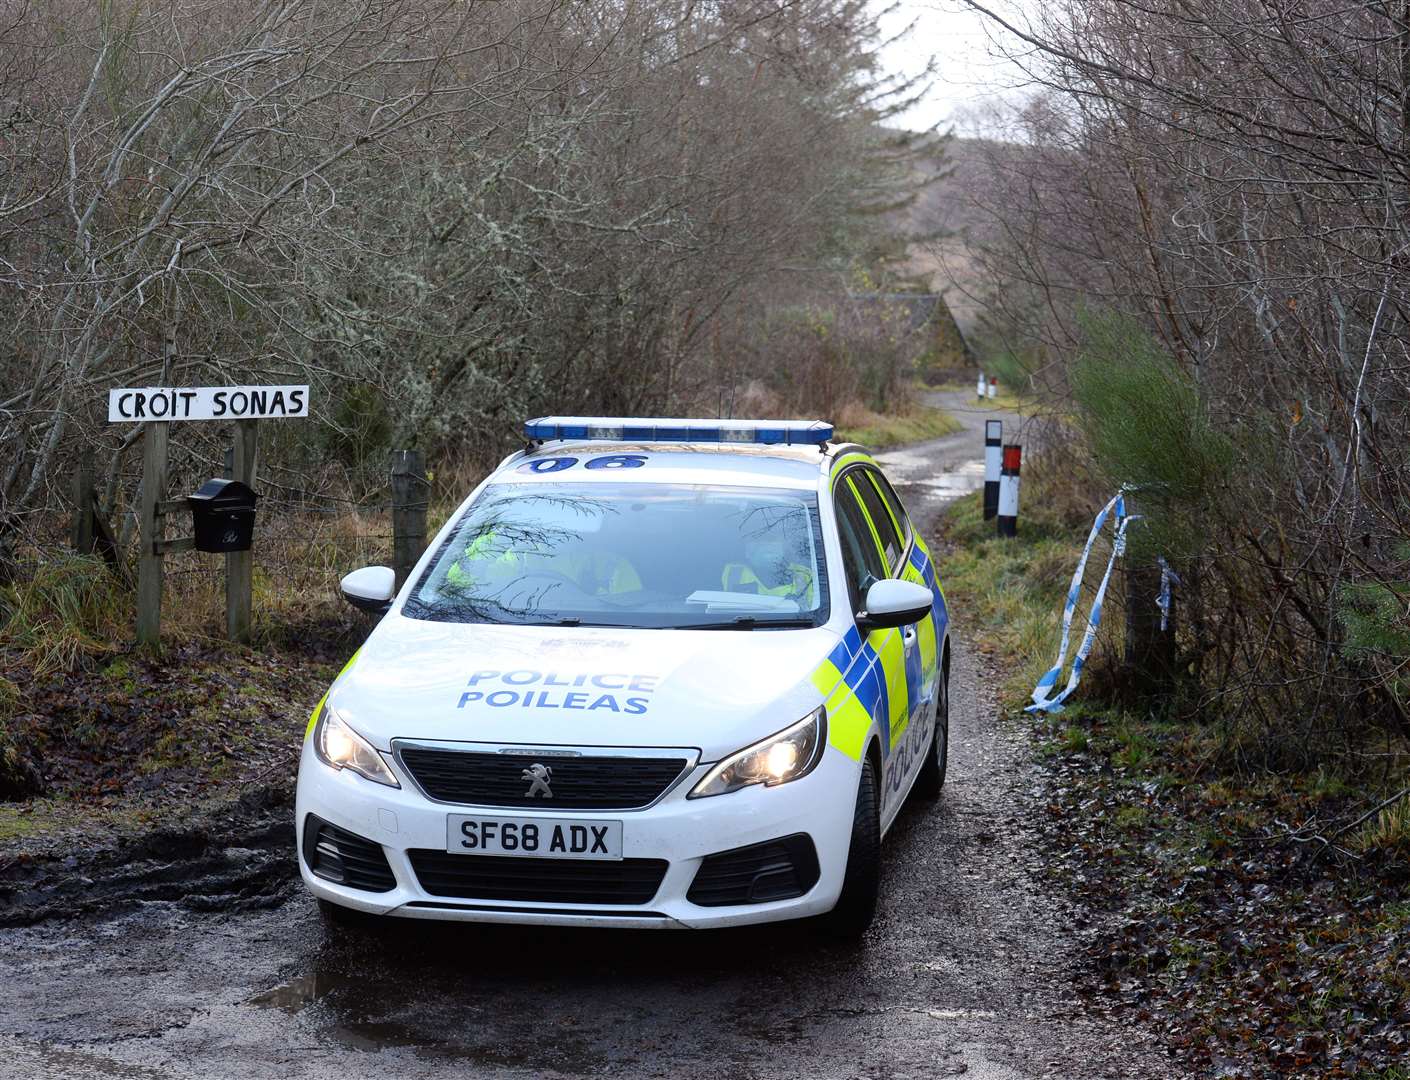 Police cordon off scene of "unexplained death" at Culnakirk near Loch Ness.